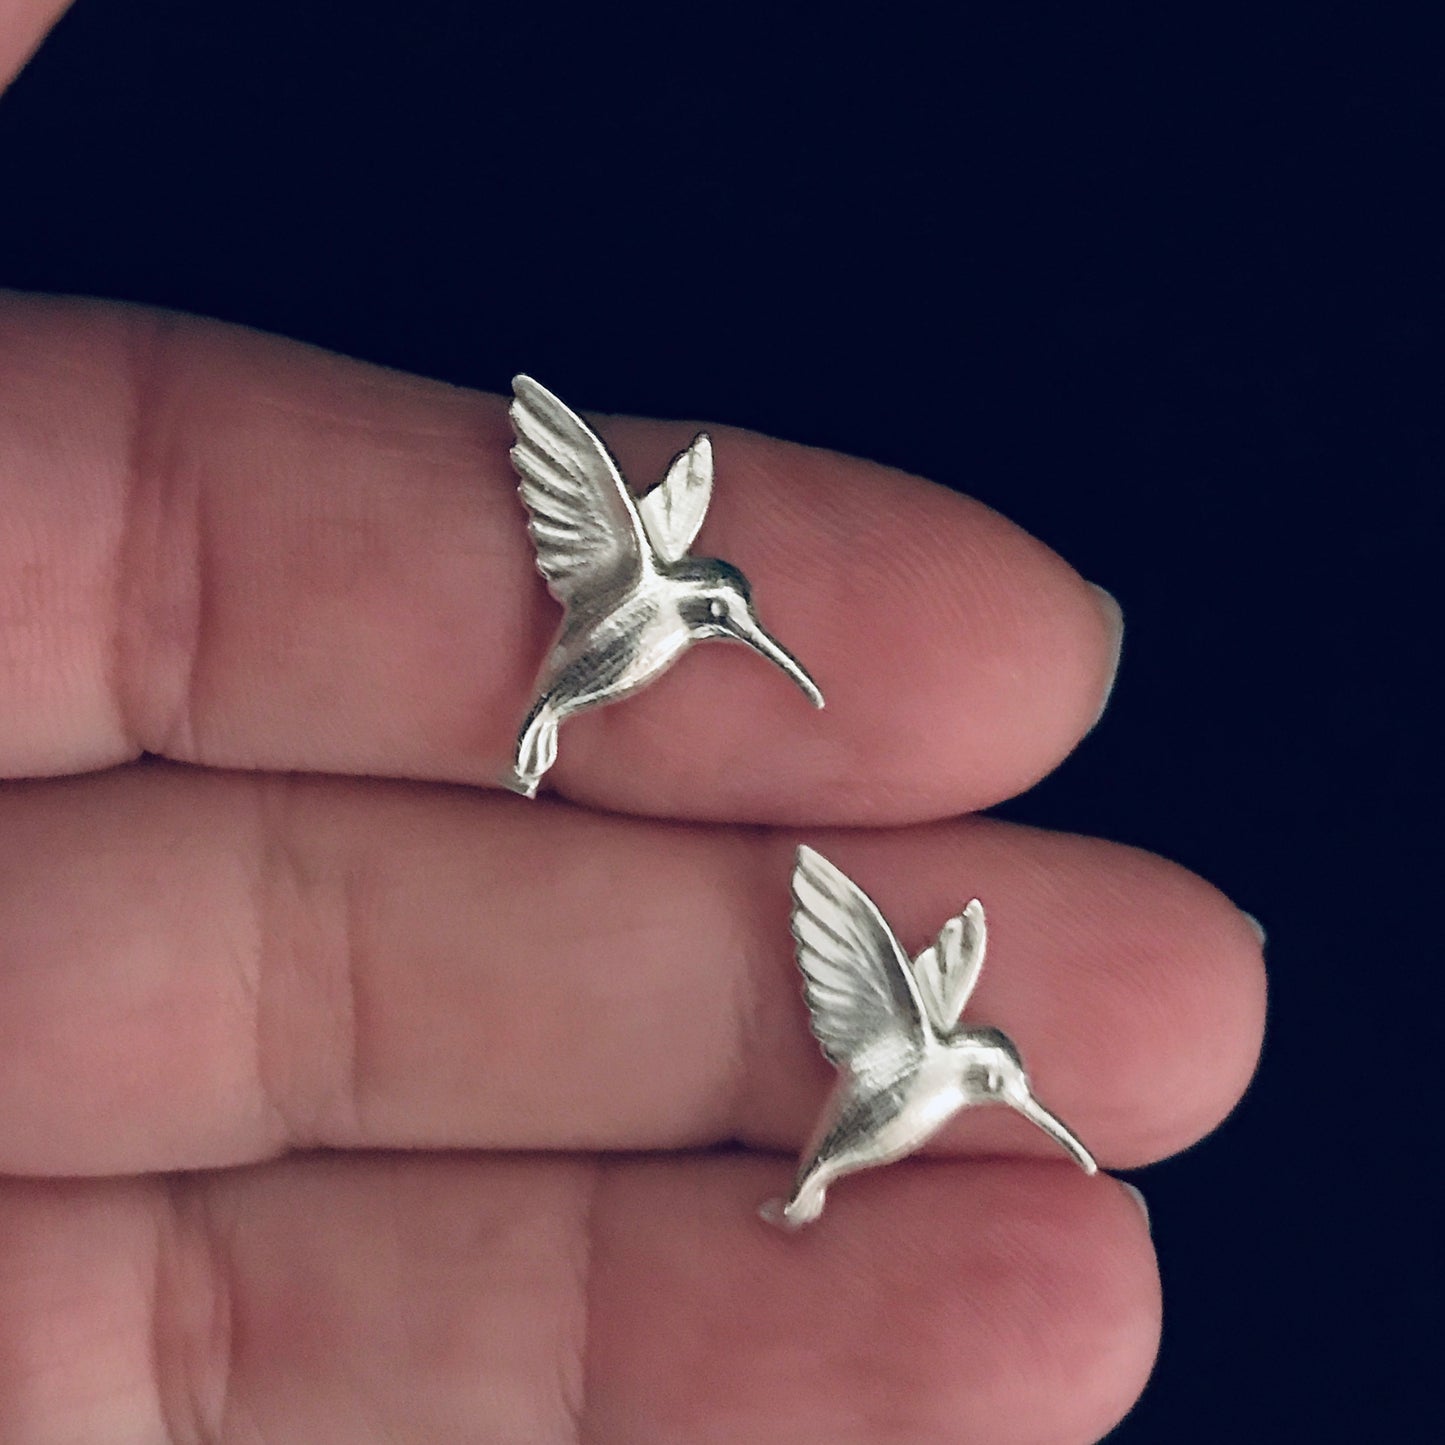 Cast Humming Bird - Right and Left Mates - for Jewelry Design